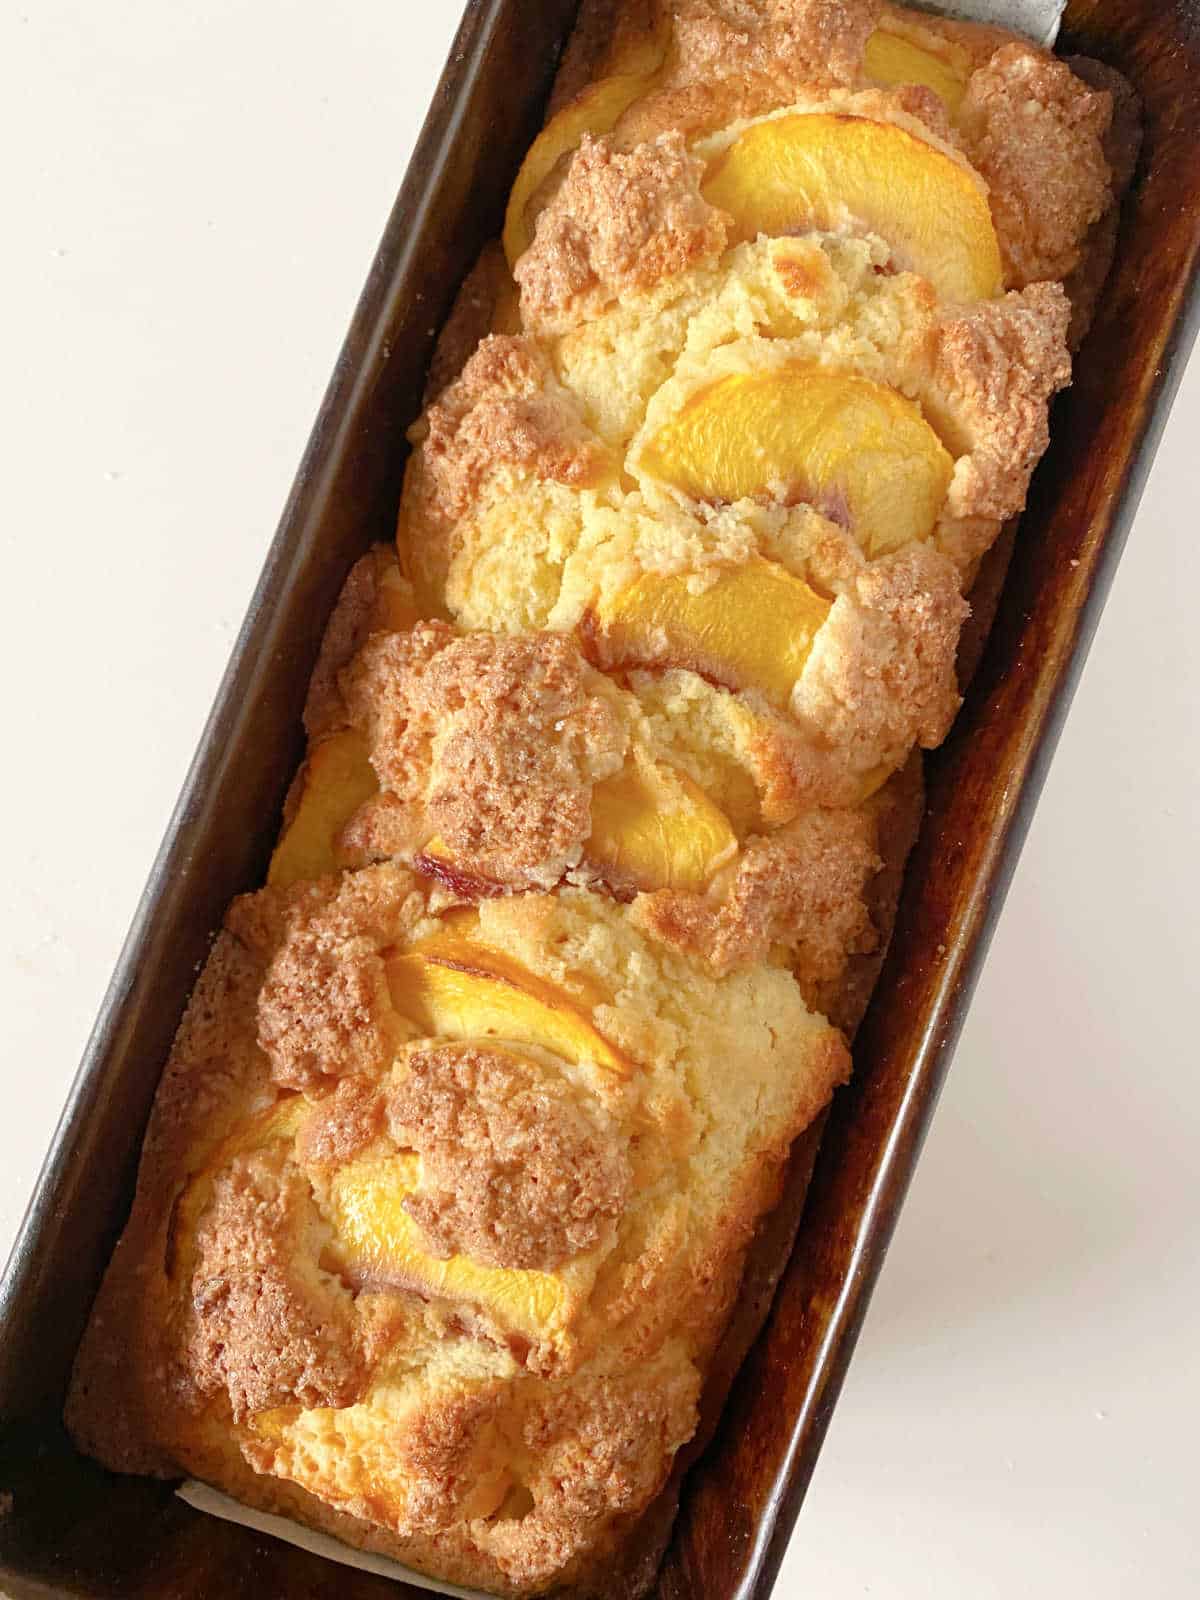 Partial top view of baked peach cake in dark metal loaf pan on a white surface.